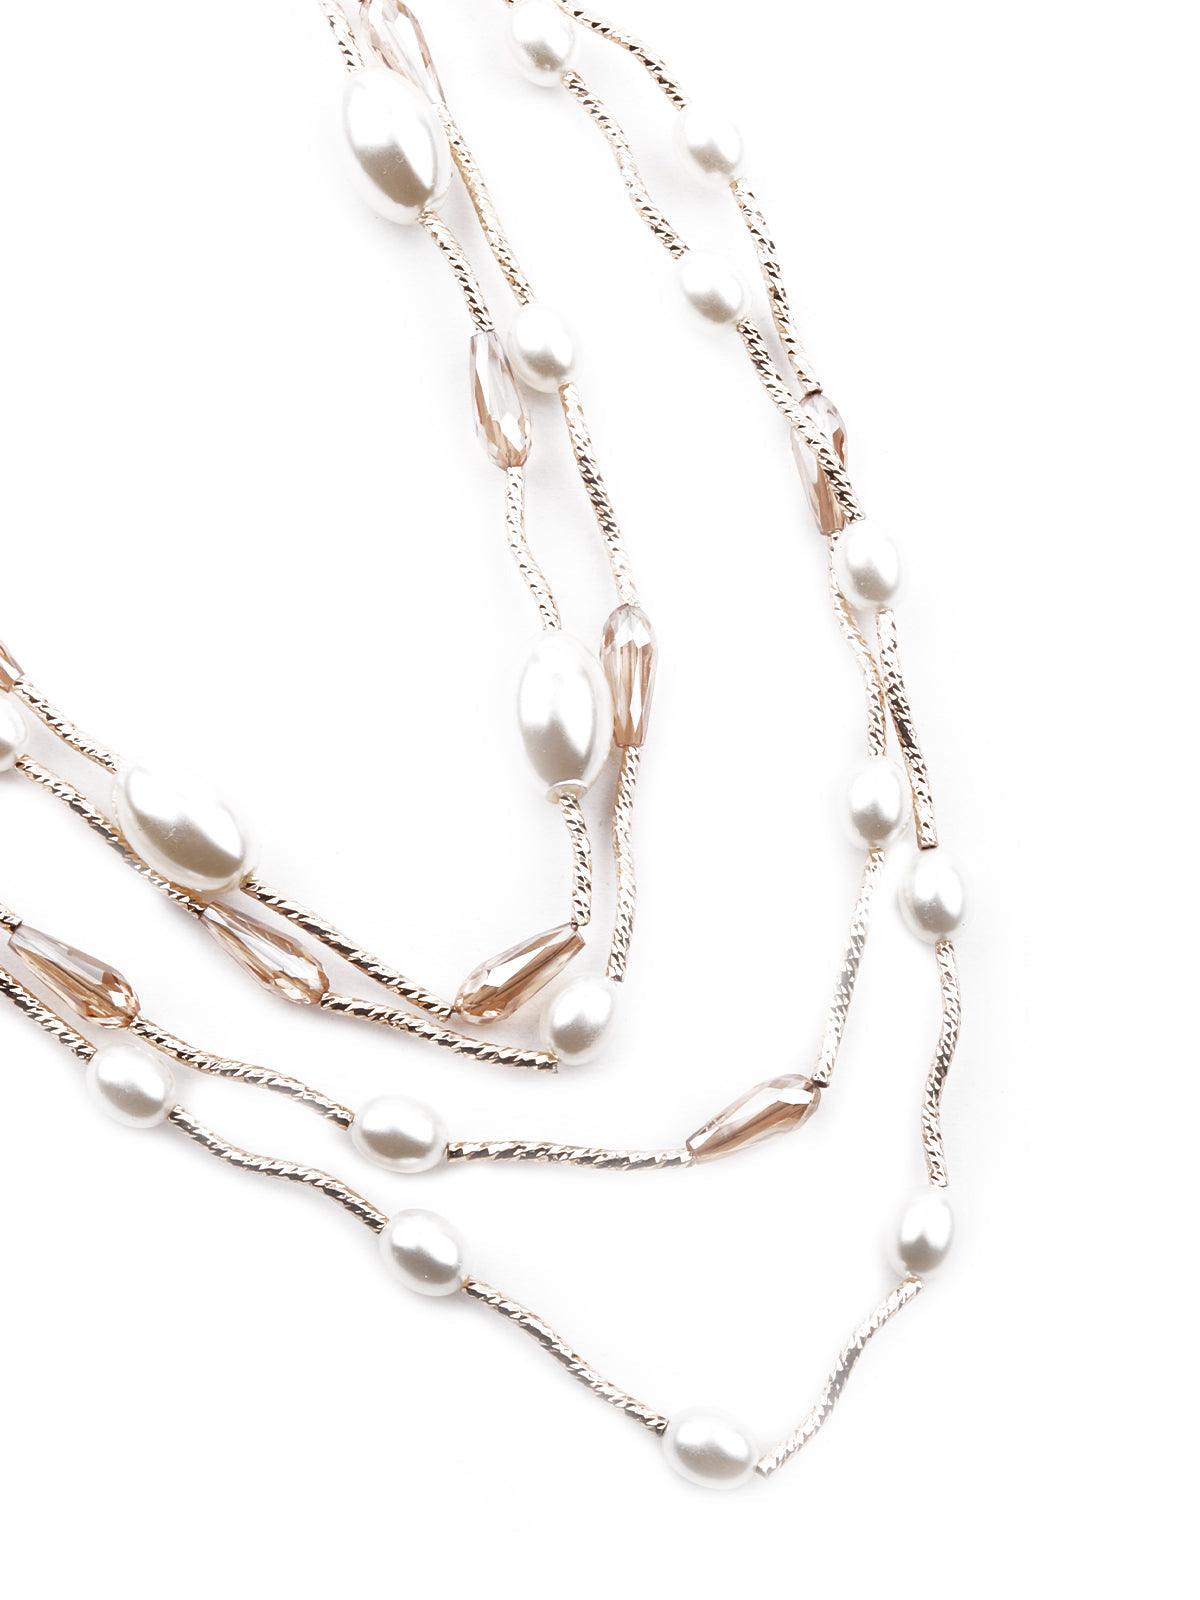 Exquisite white and gold layered necklace - Odette